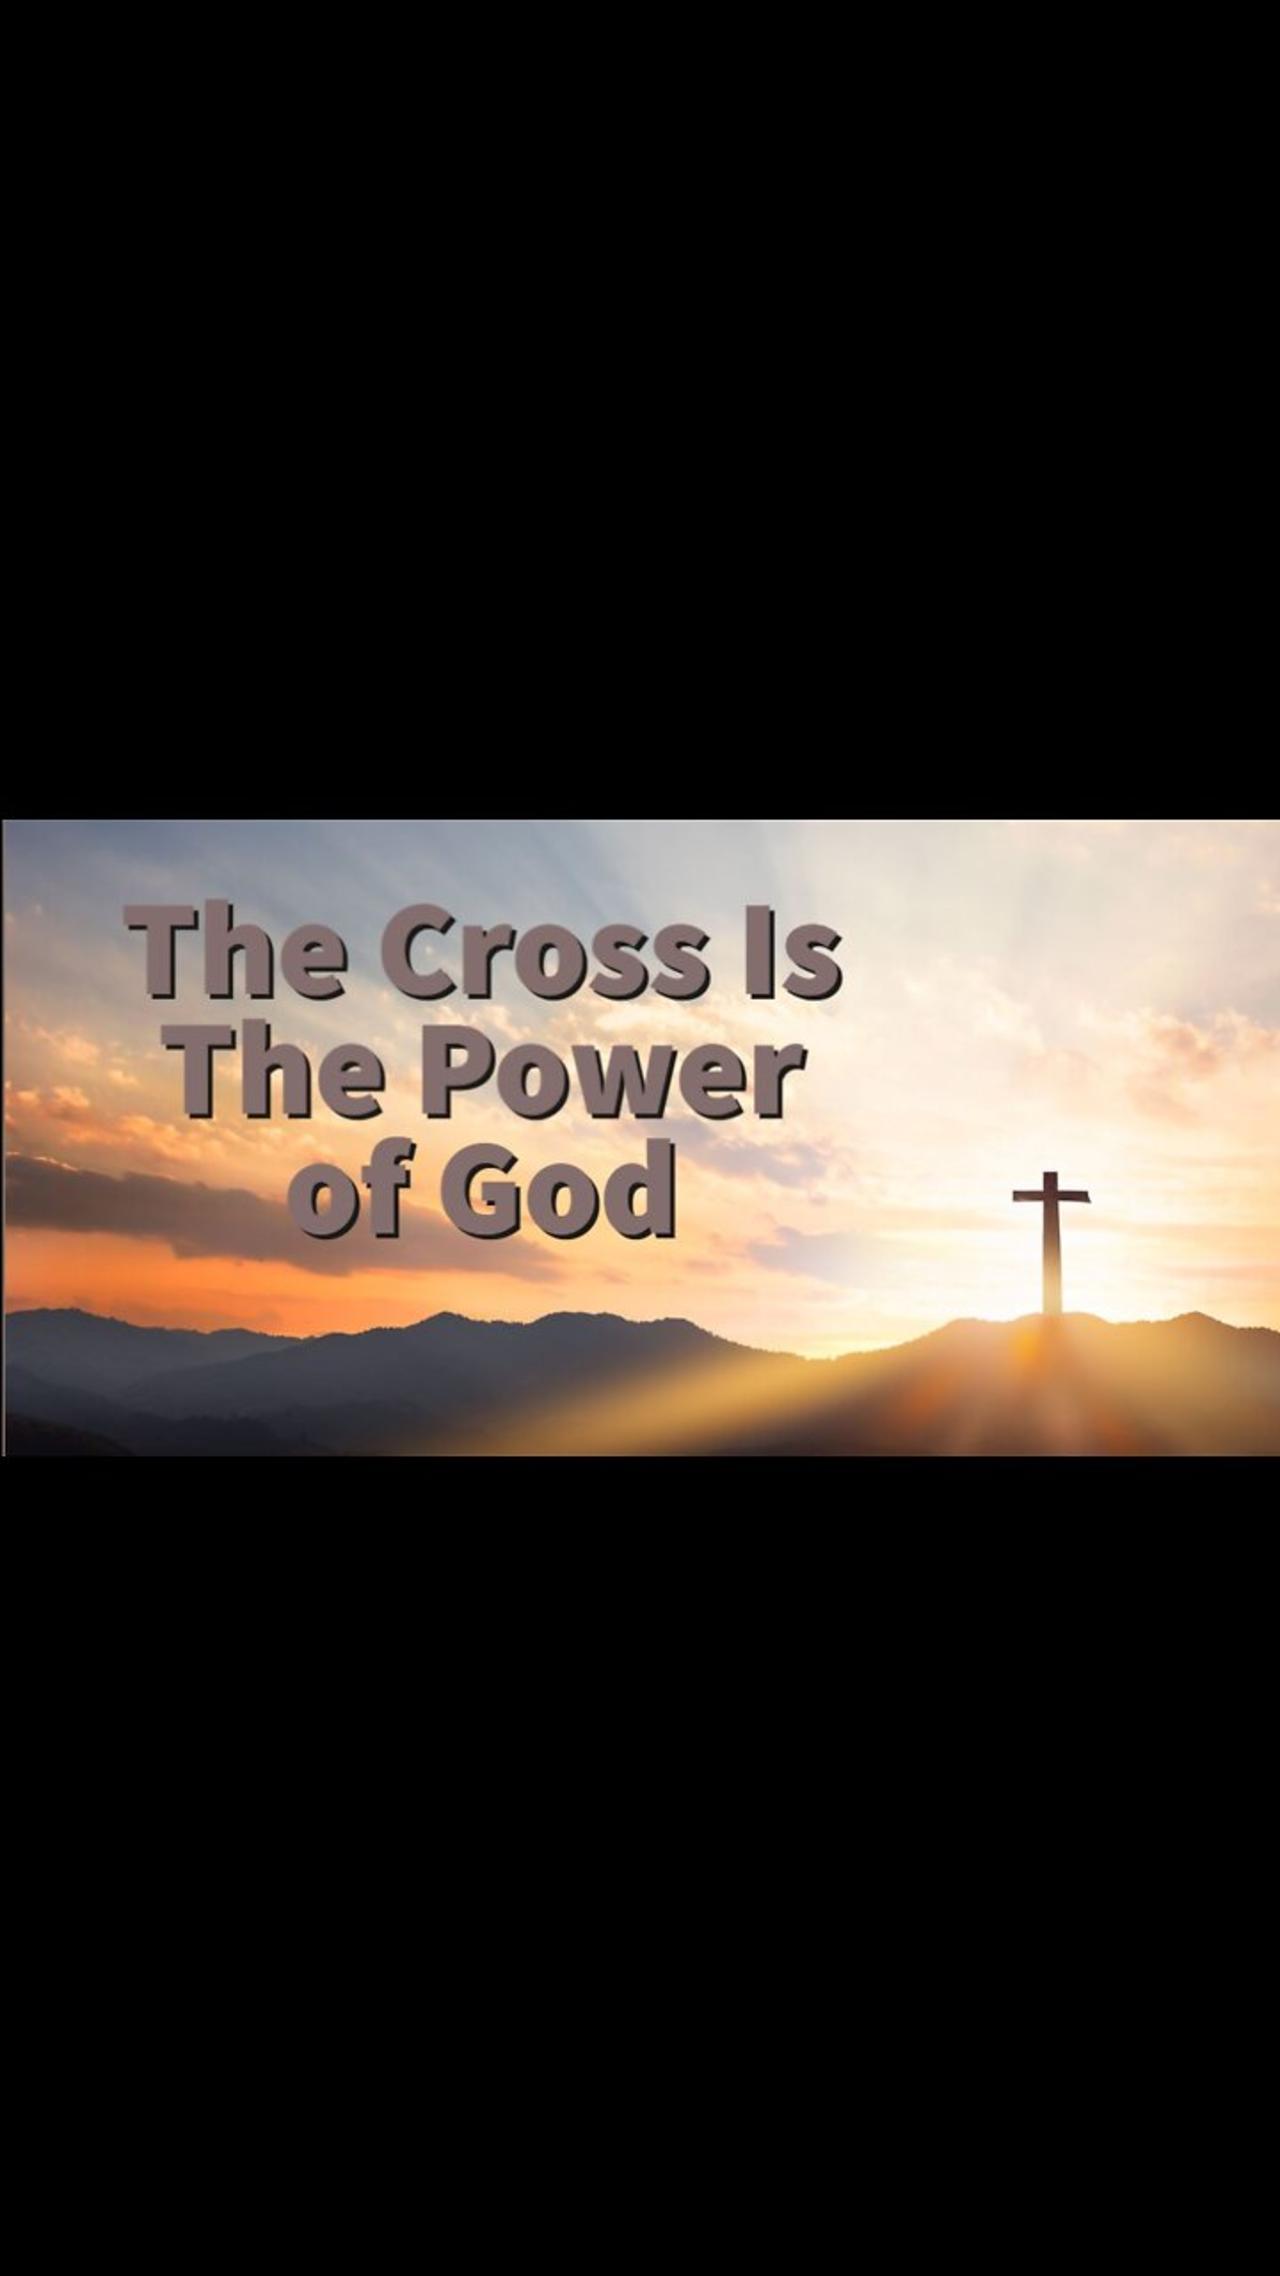 The Cross is the Power of God